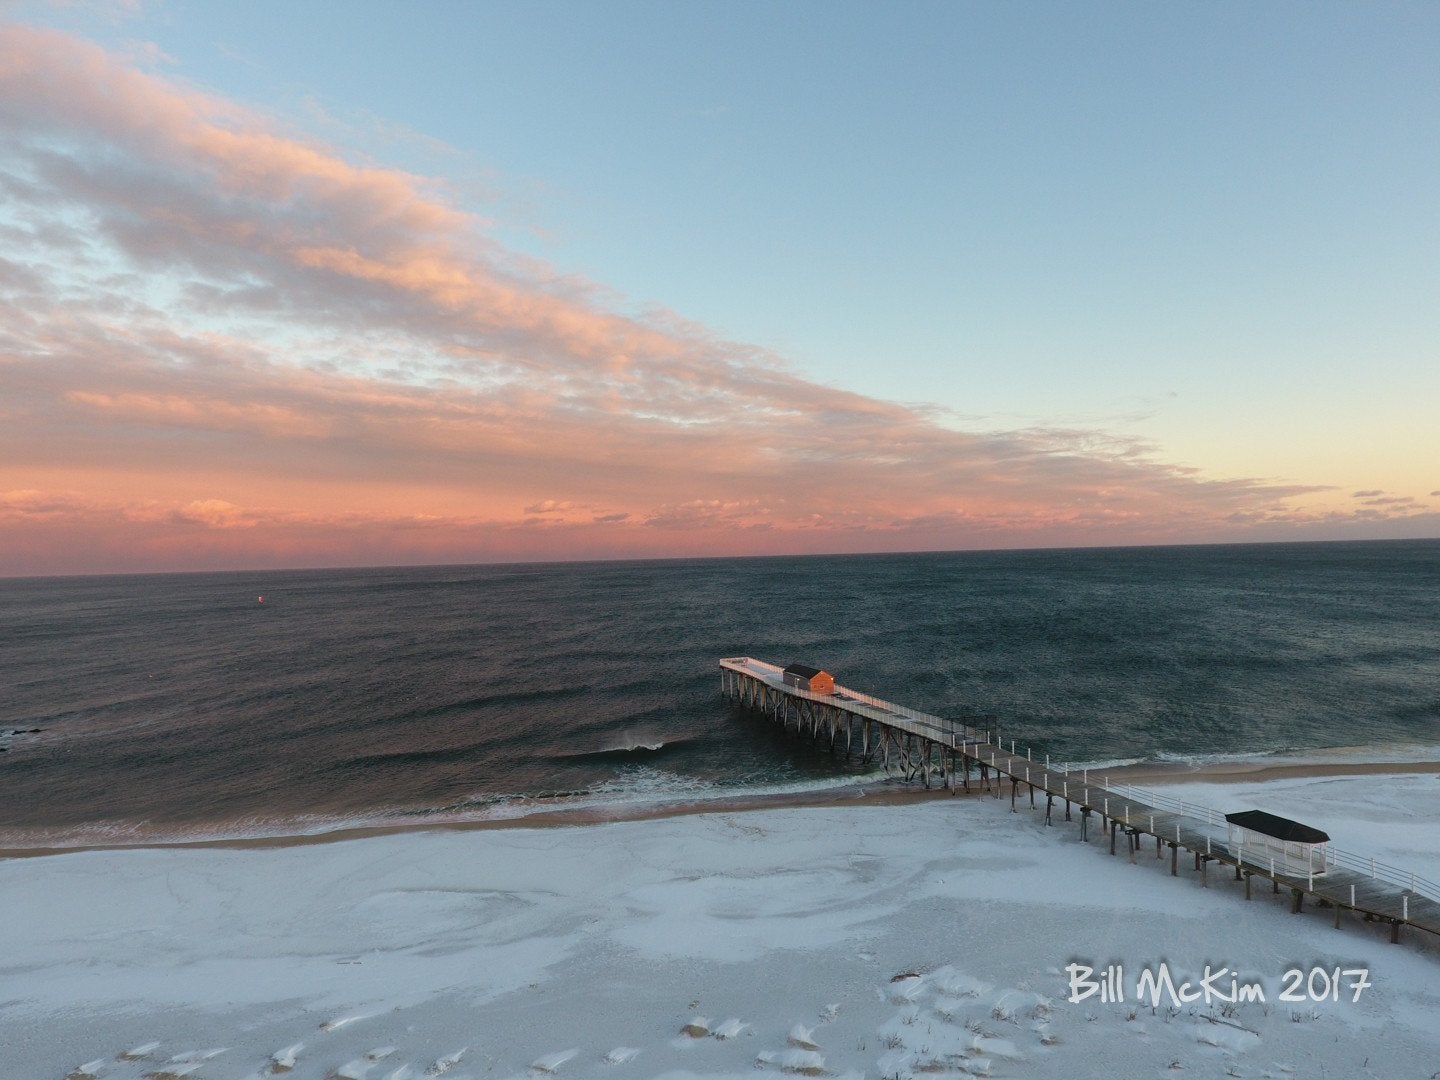 After the snowstorm Jersey shore sky photos